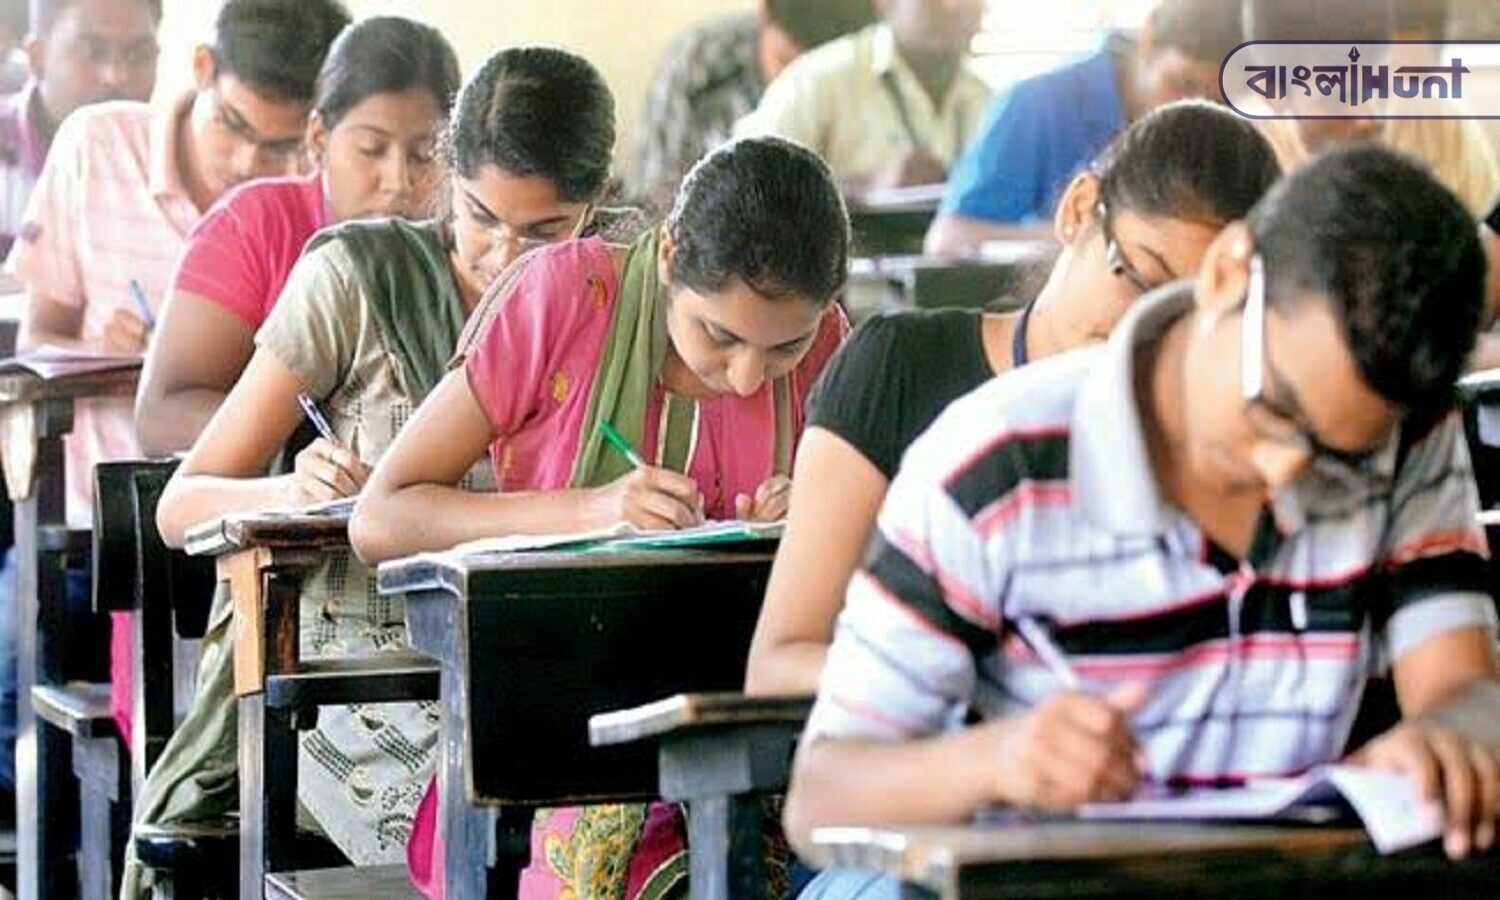 After 5 years, TET examination is being held in the state